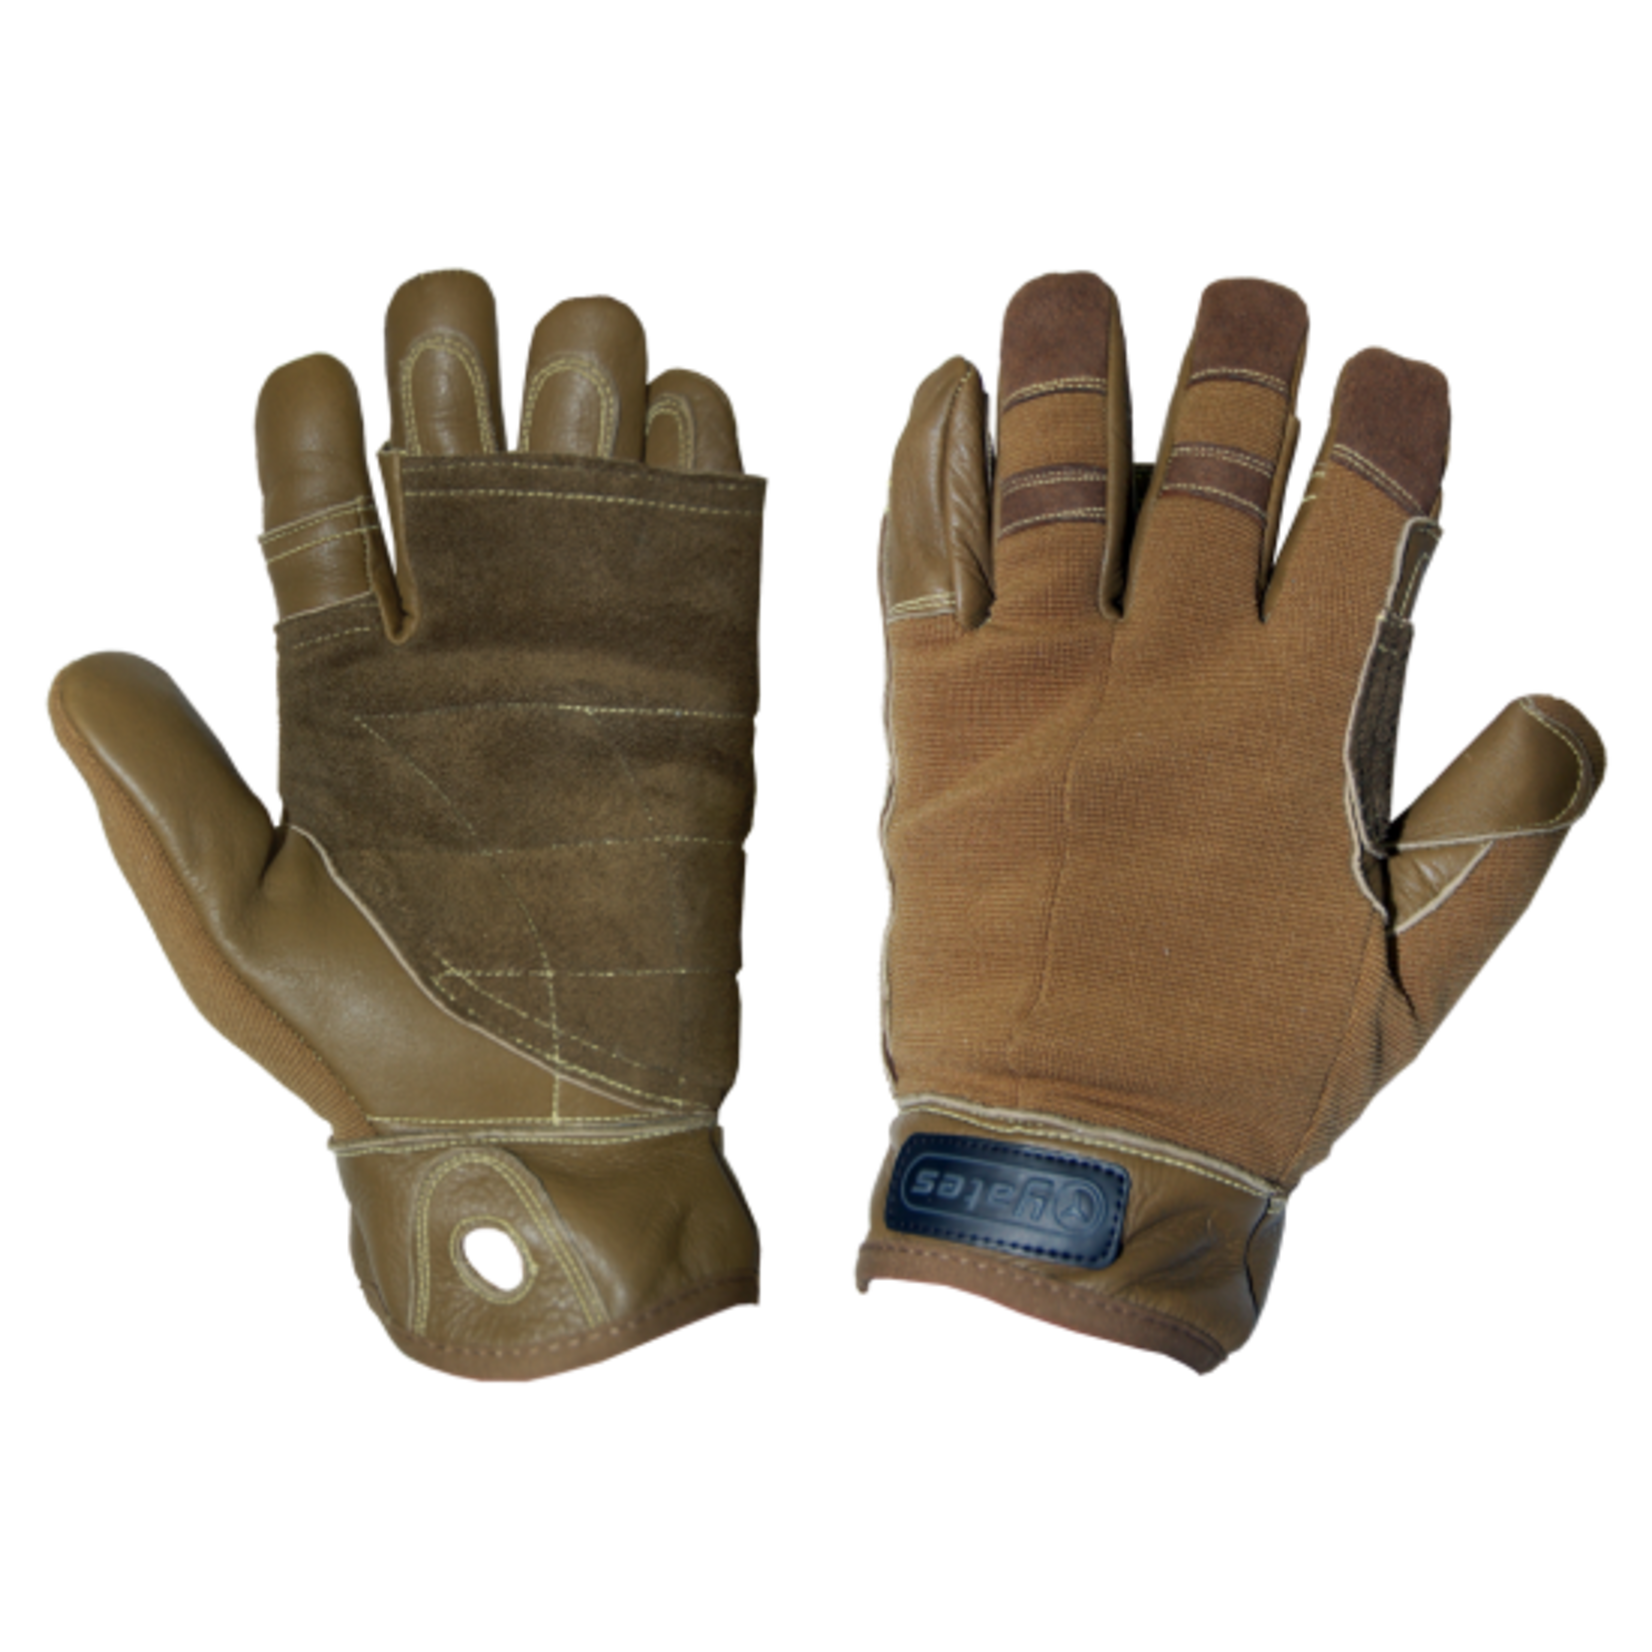 Yates 925T YATES TACTICAL RAPPEL / FAST ROPE GLOVES (TAN)